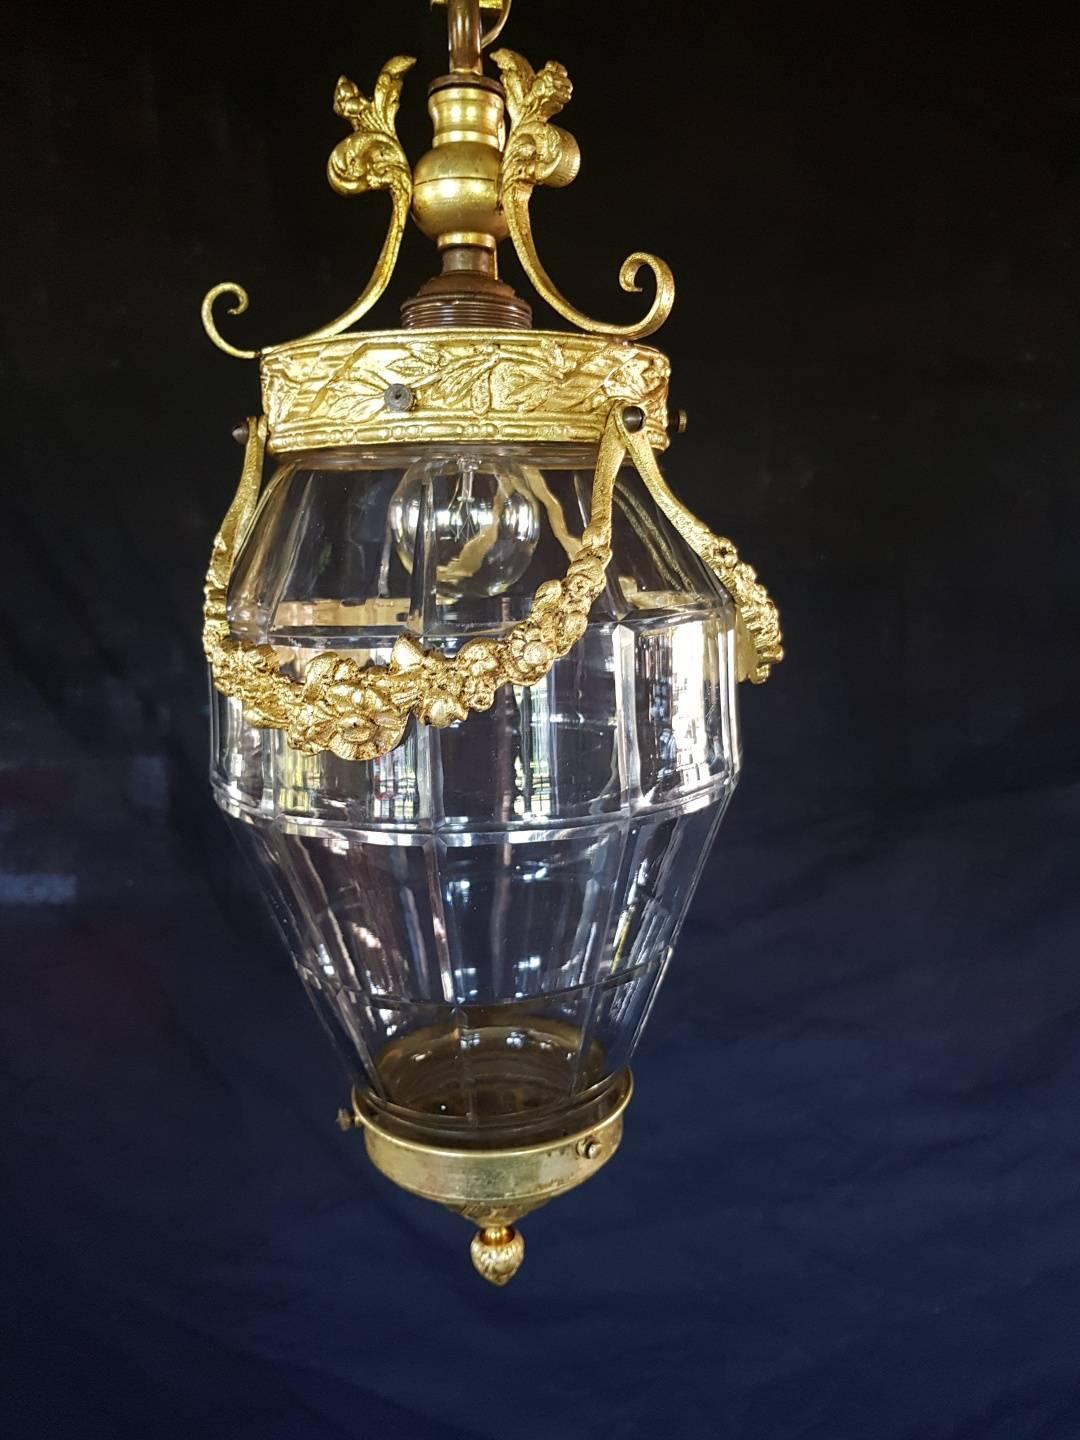 Antique Gilt Bronze Lantern with Molded Cut-Glass For Sale 4